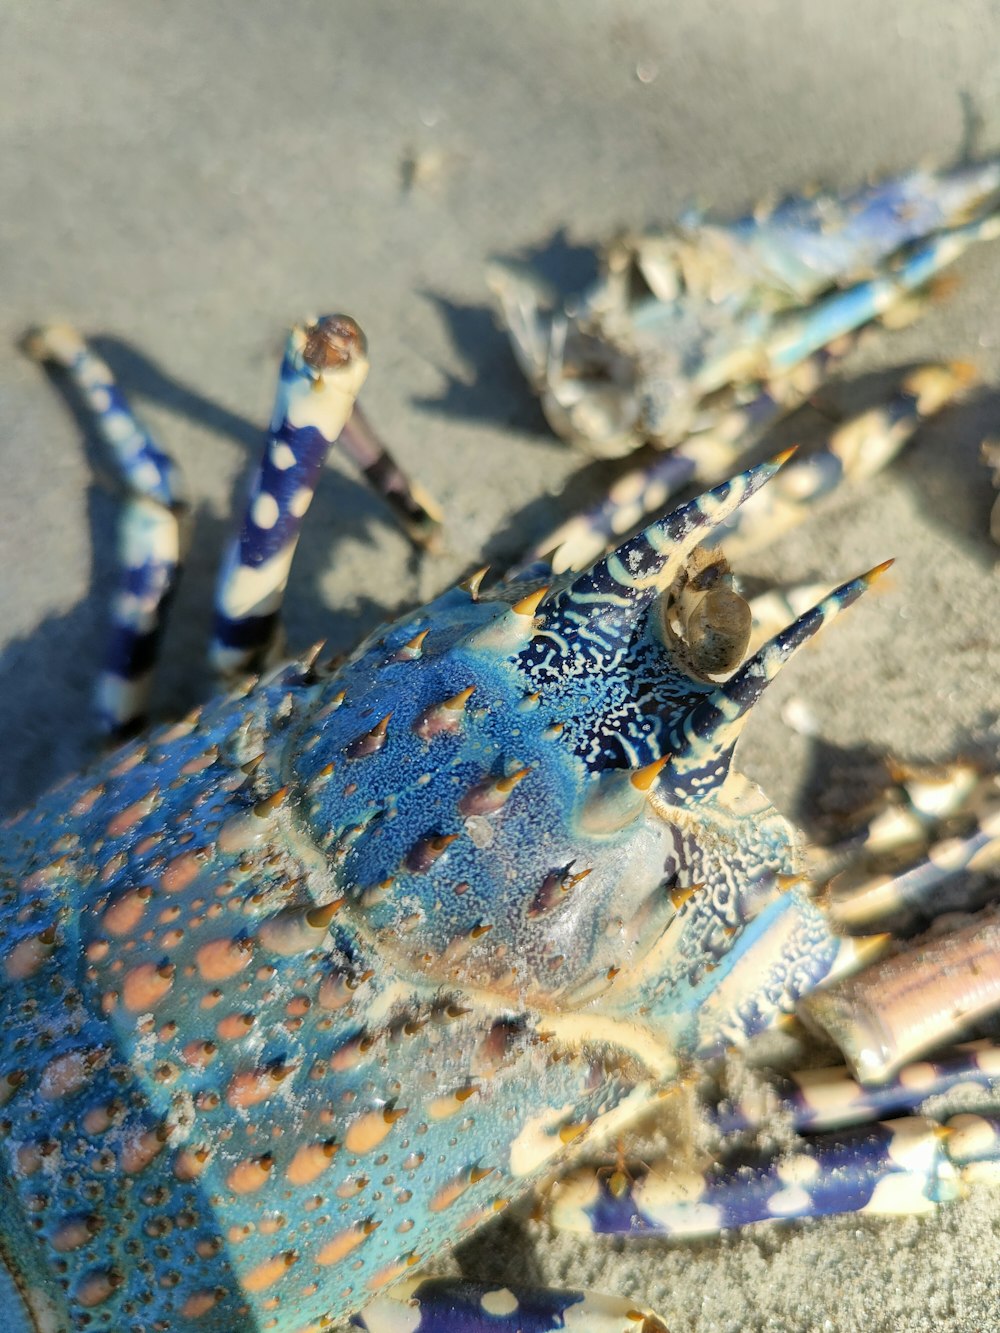 a close up of a blue crab on a beach